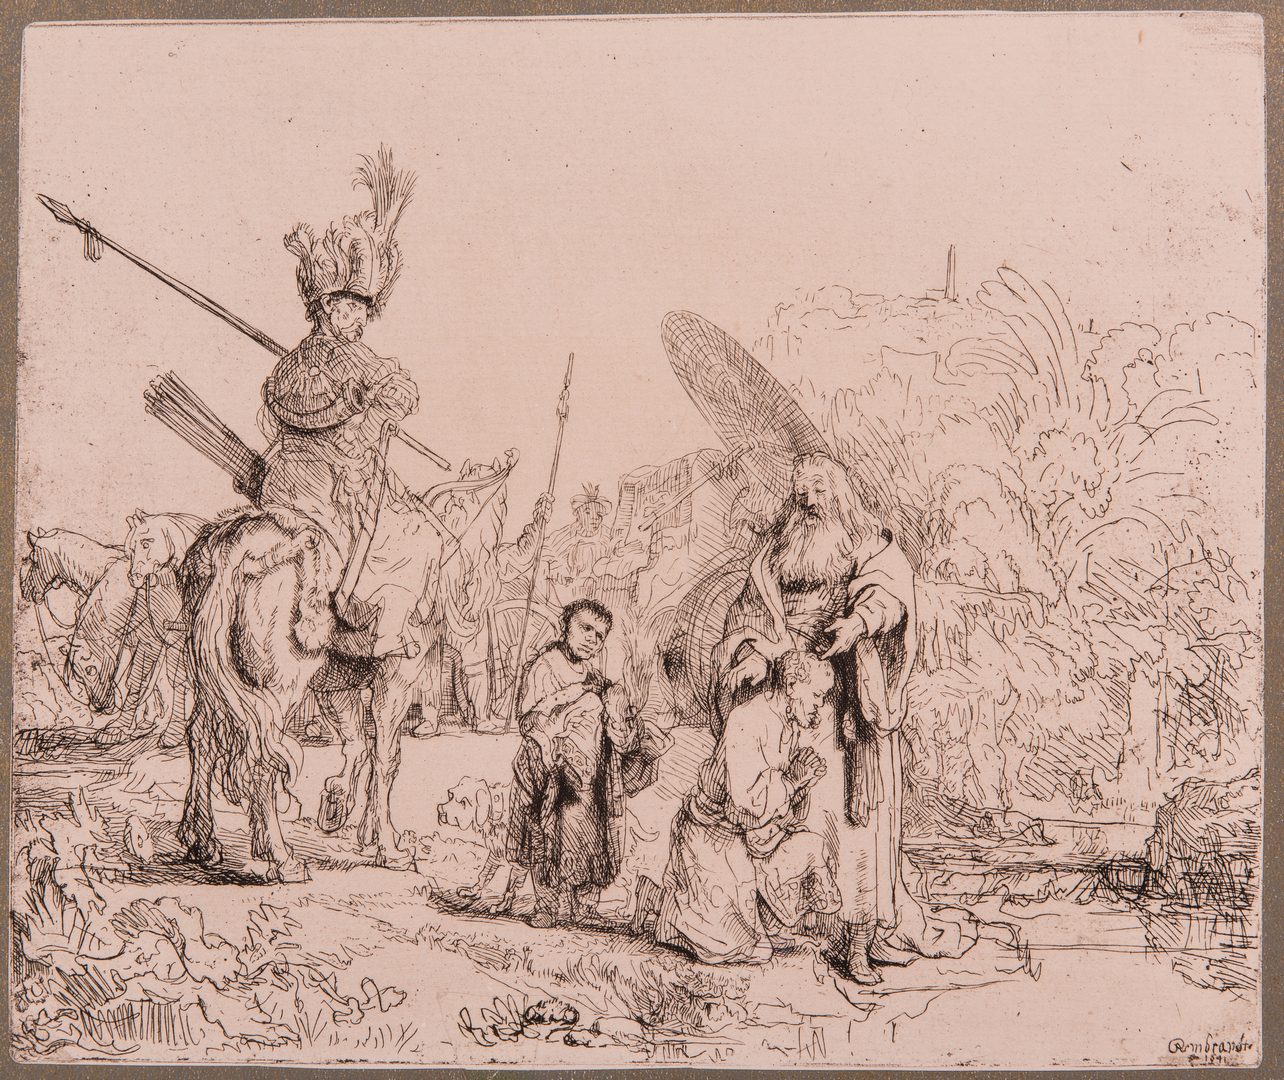 Lot 309: After Rembrandt, 8 Amand Durand Religious Heliogravures, 19th cent.